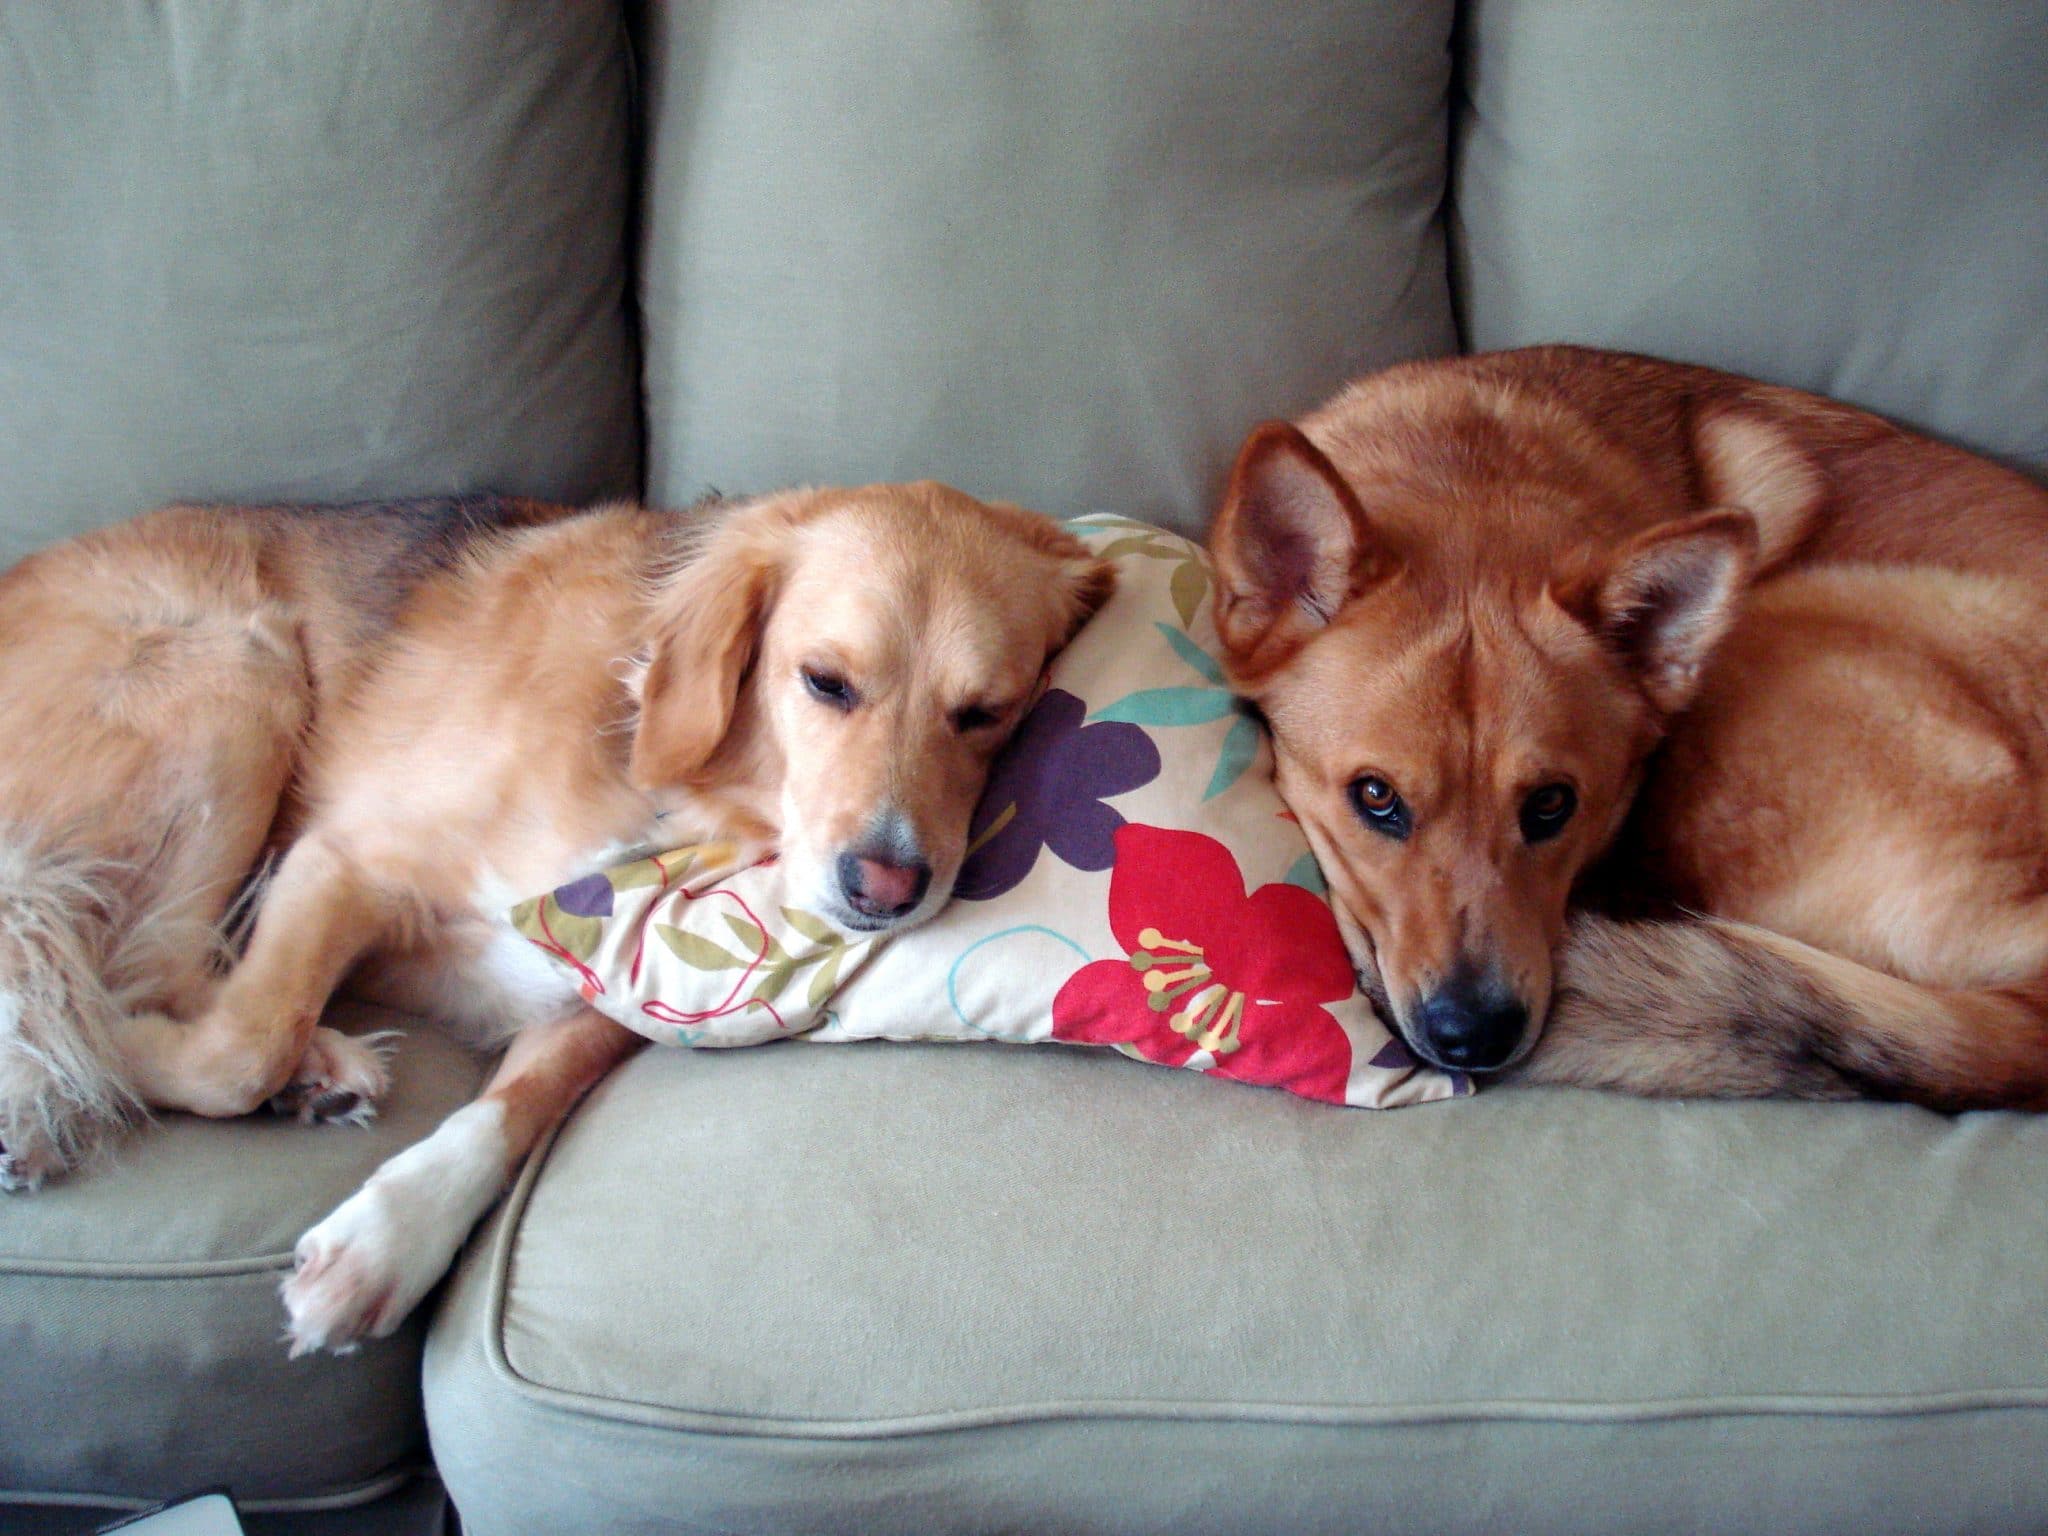 Dogs sharing a pillow on the couch